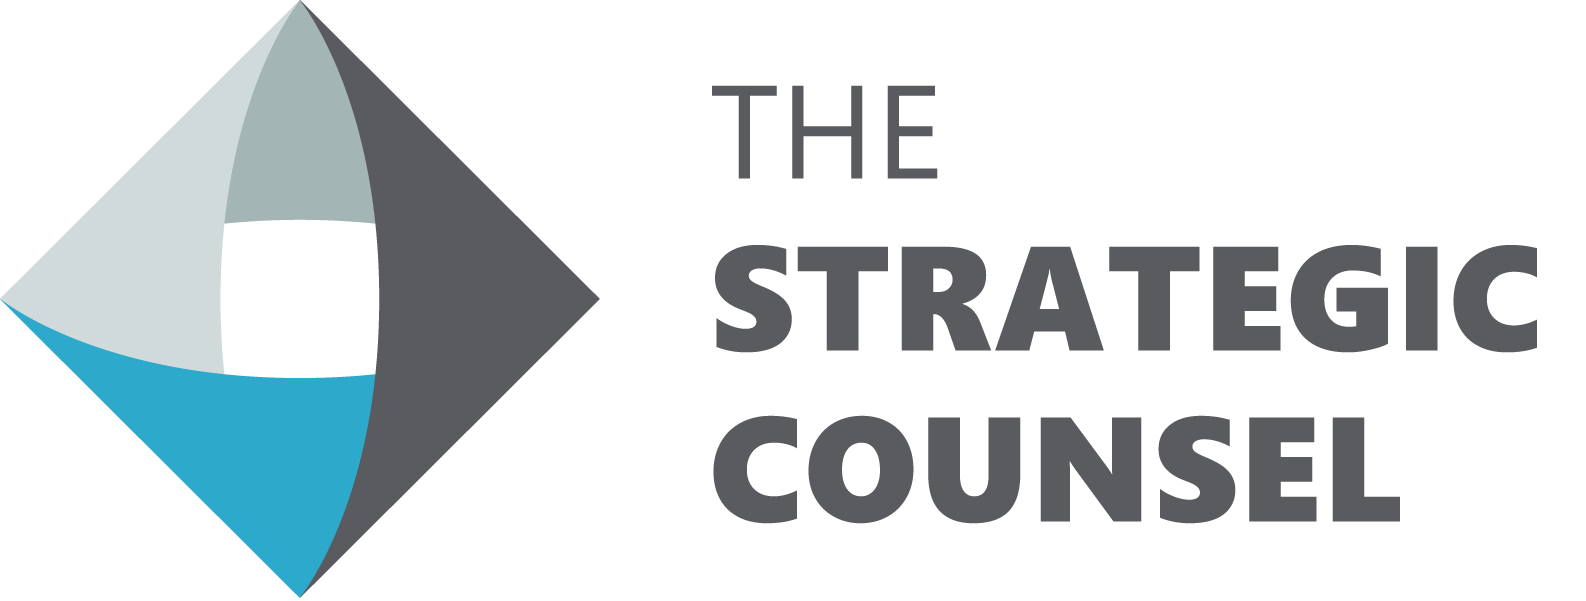 The Strategic Counsel